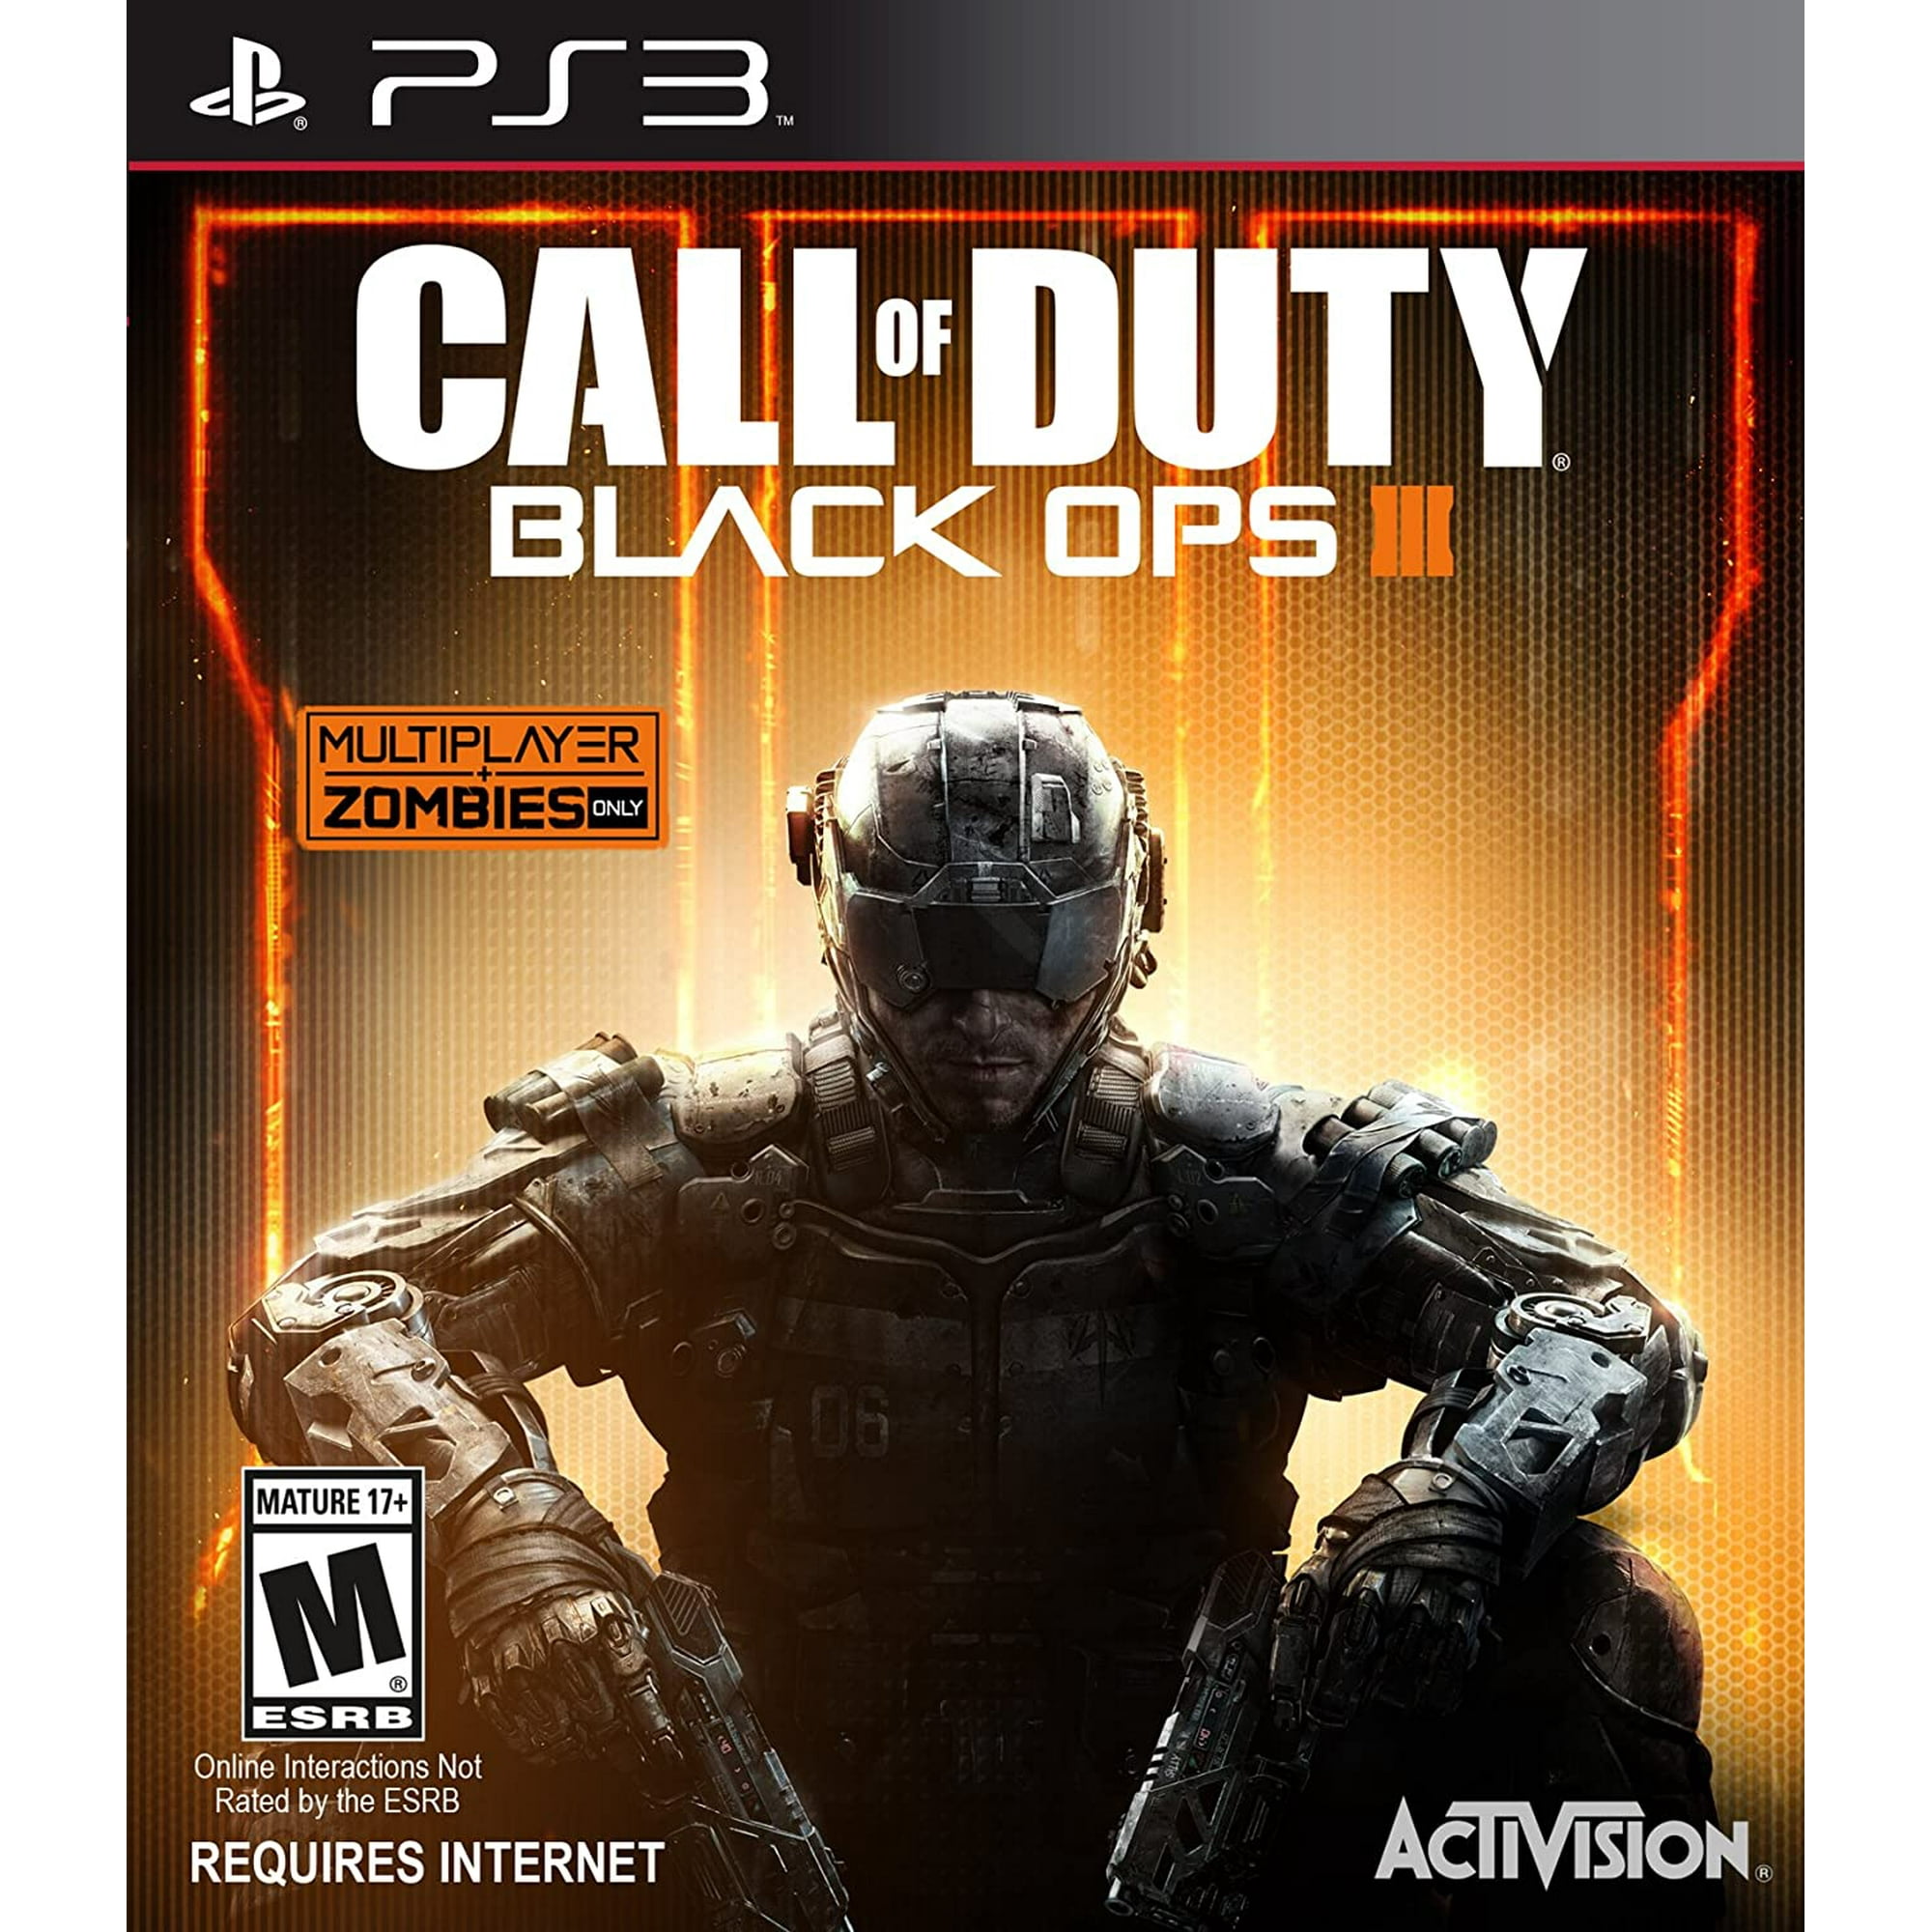 Ps3 зомби. Black ops Xbox 360. Call of Duty Black ops 3 диск. Call of Duty: Black ops III ps3. Cod Black ops 3 Xbox 360.